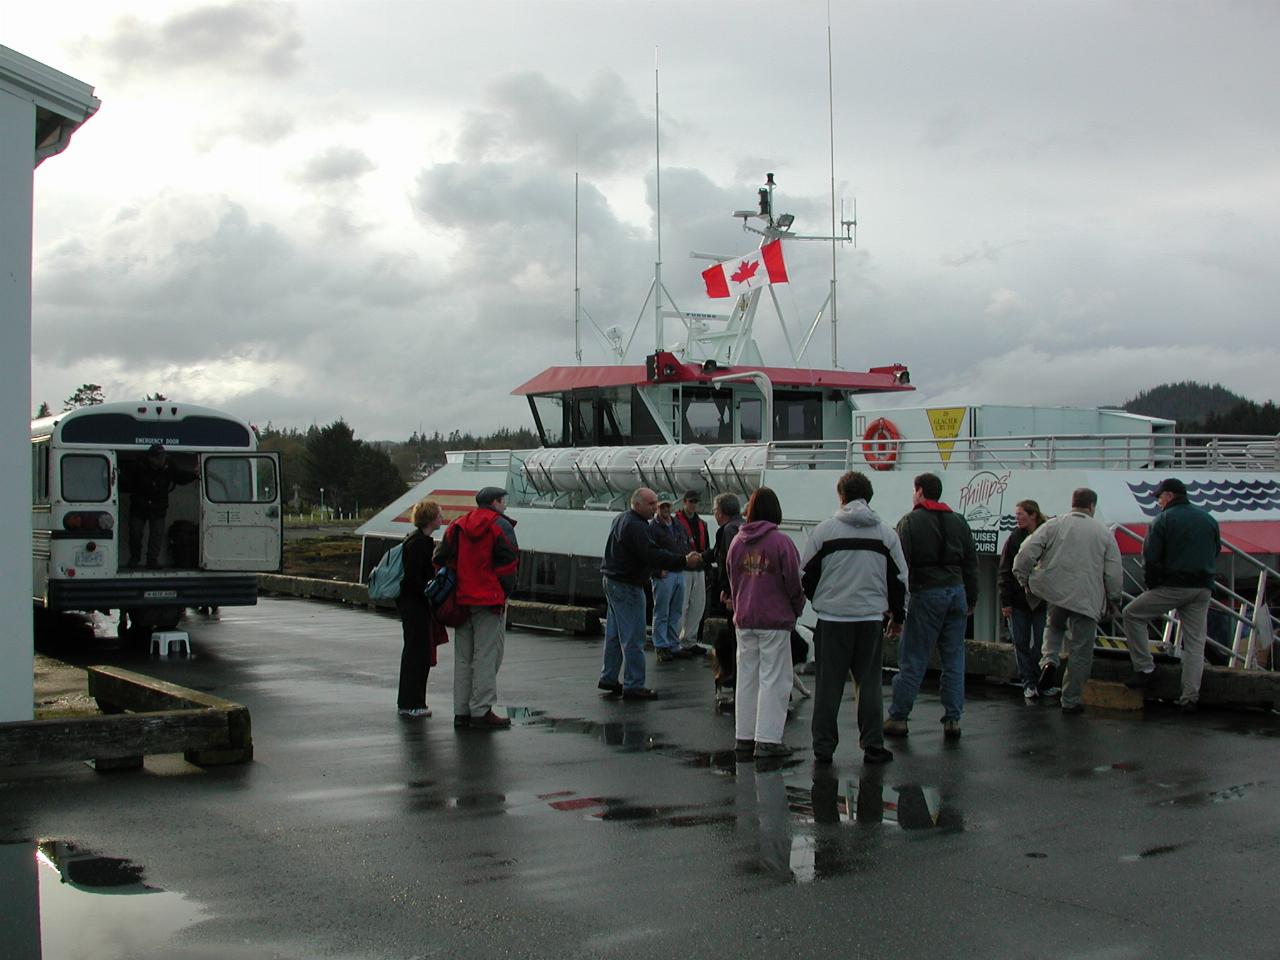 Unloading passengers, with a very low tide